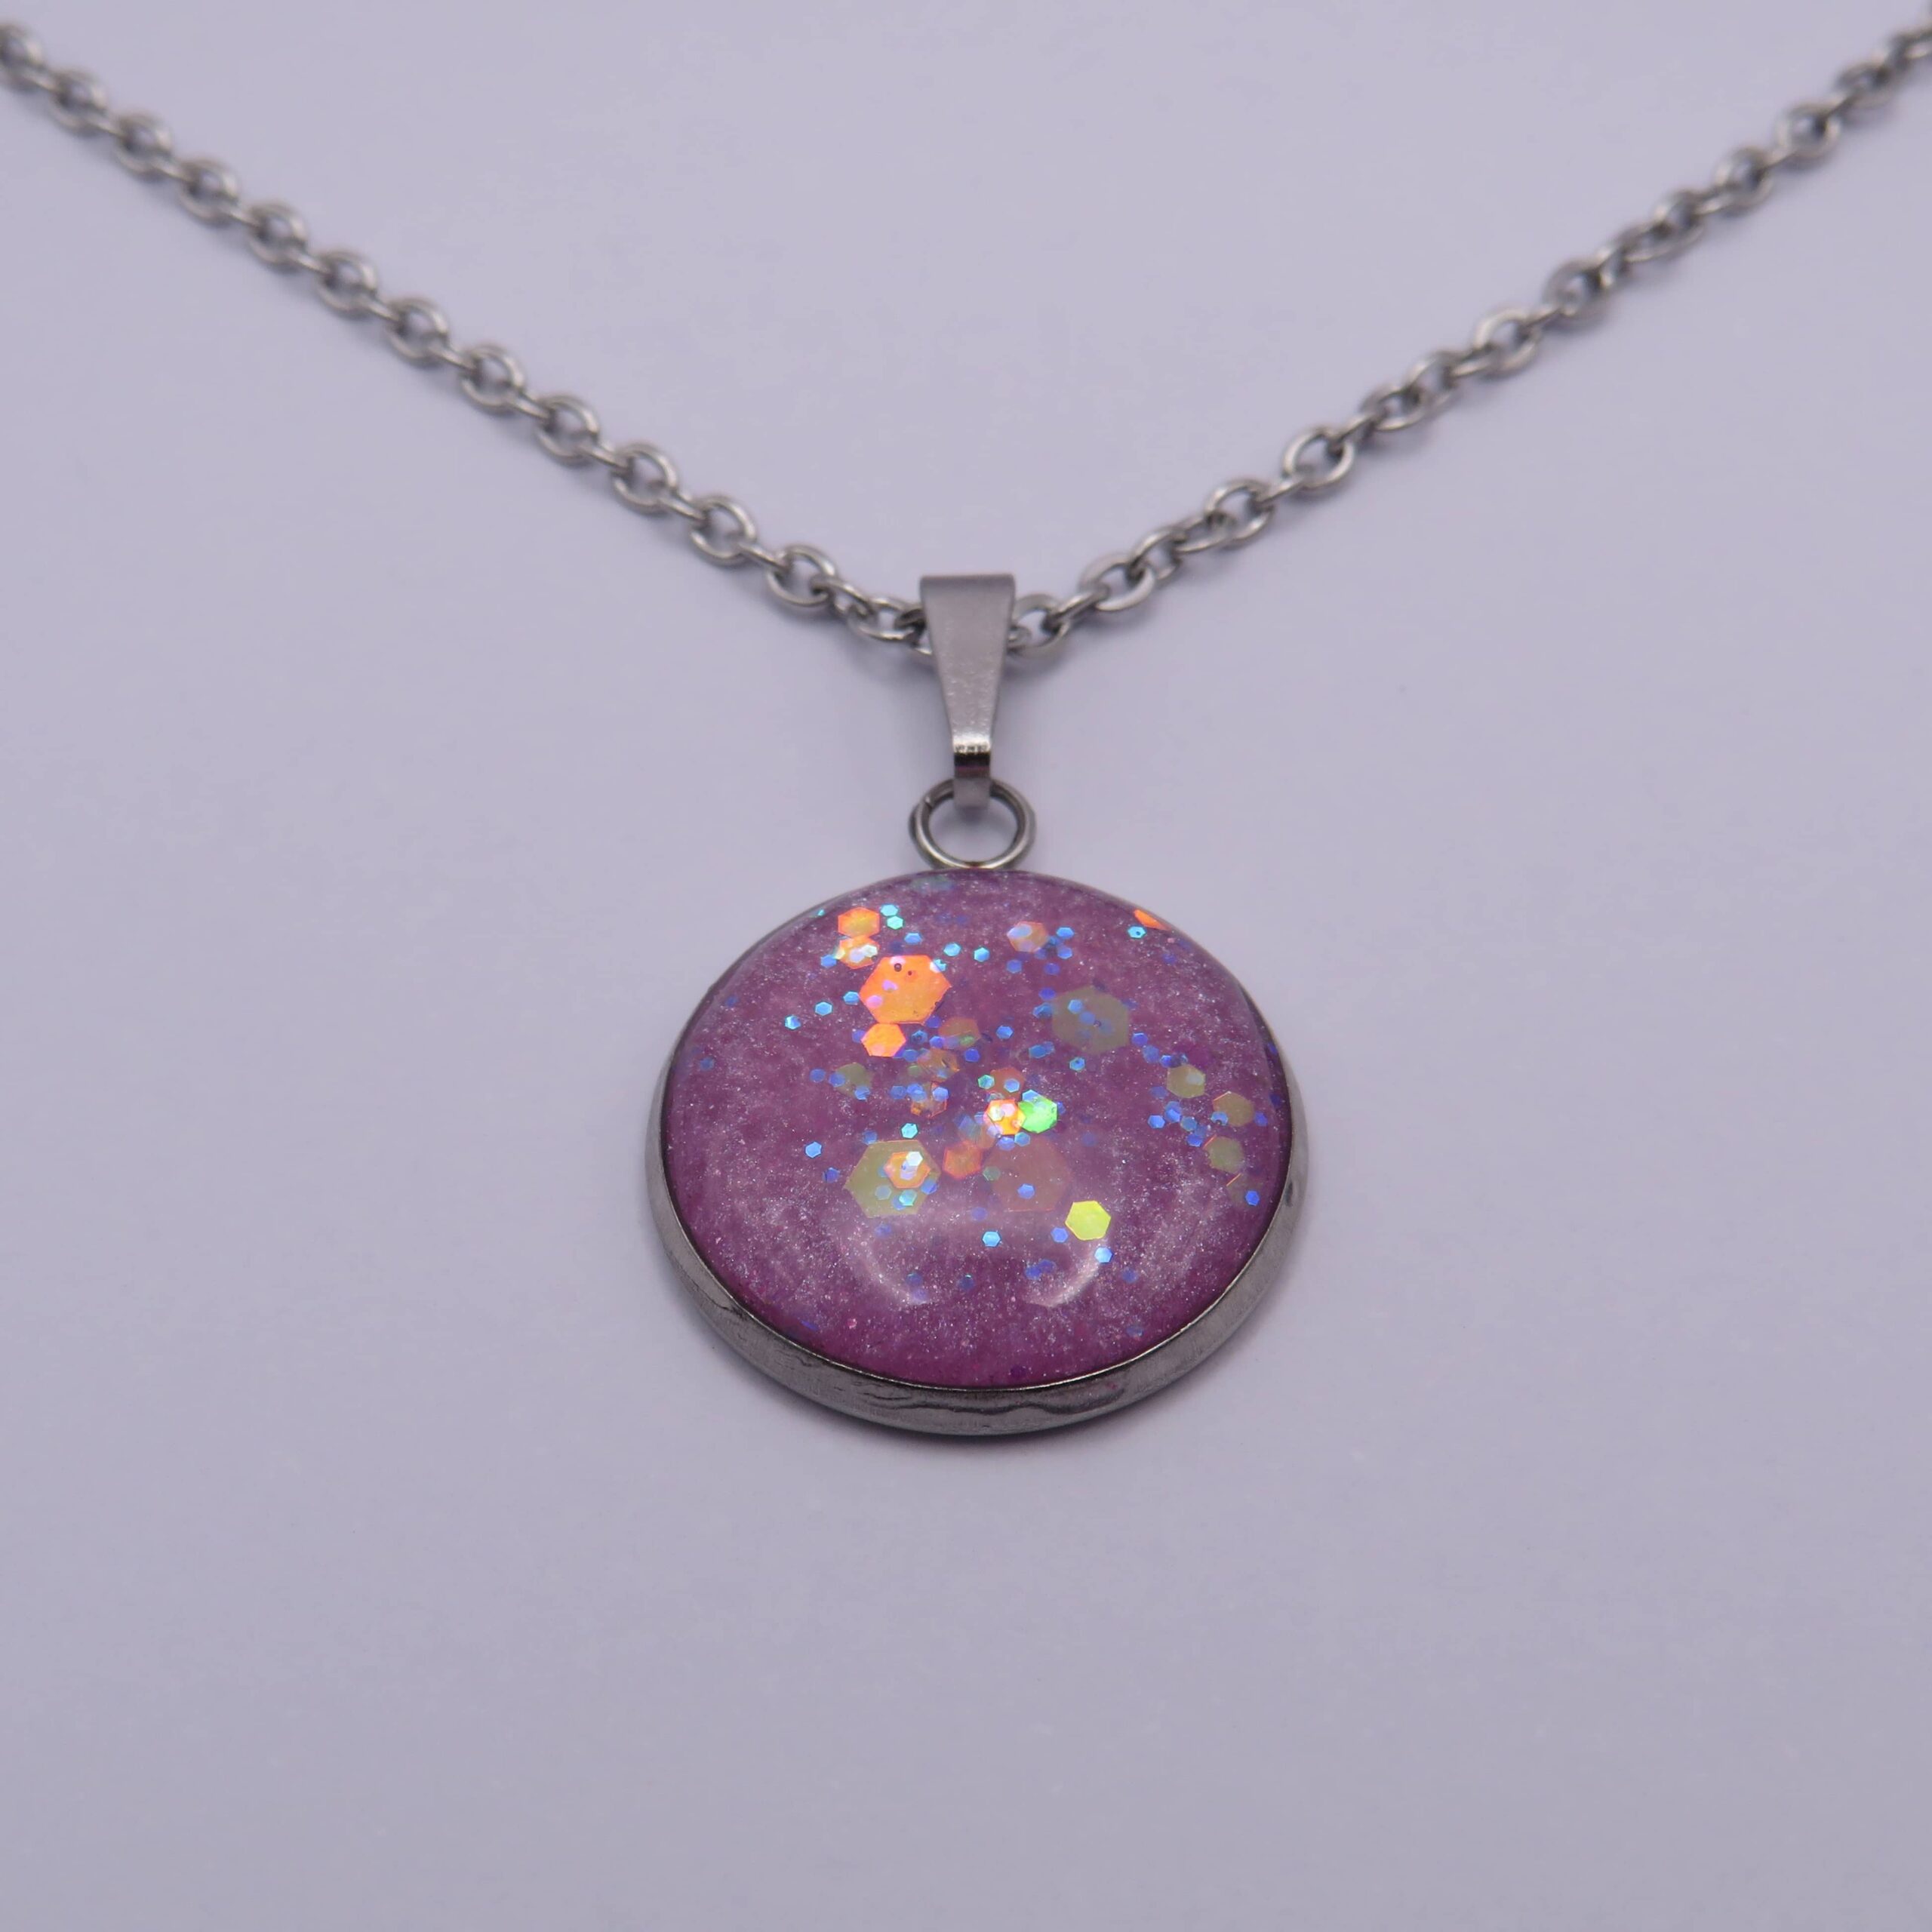 Stainless Steel Pink Sequins Cabochon Pendant Necklace